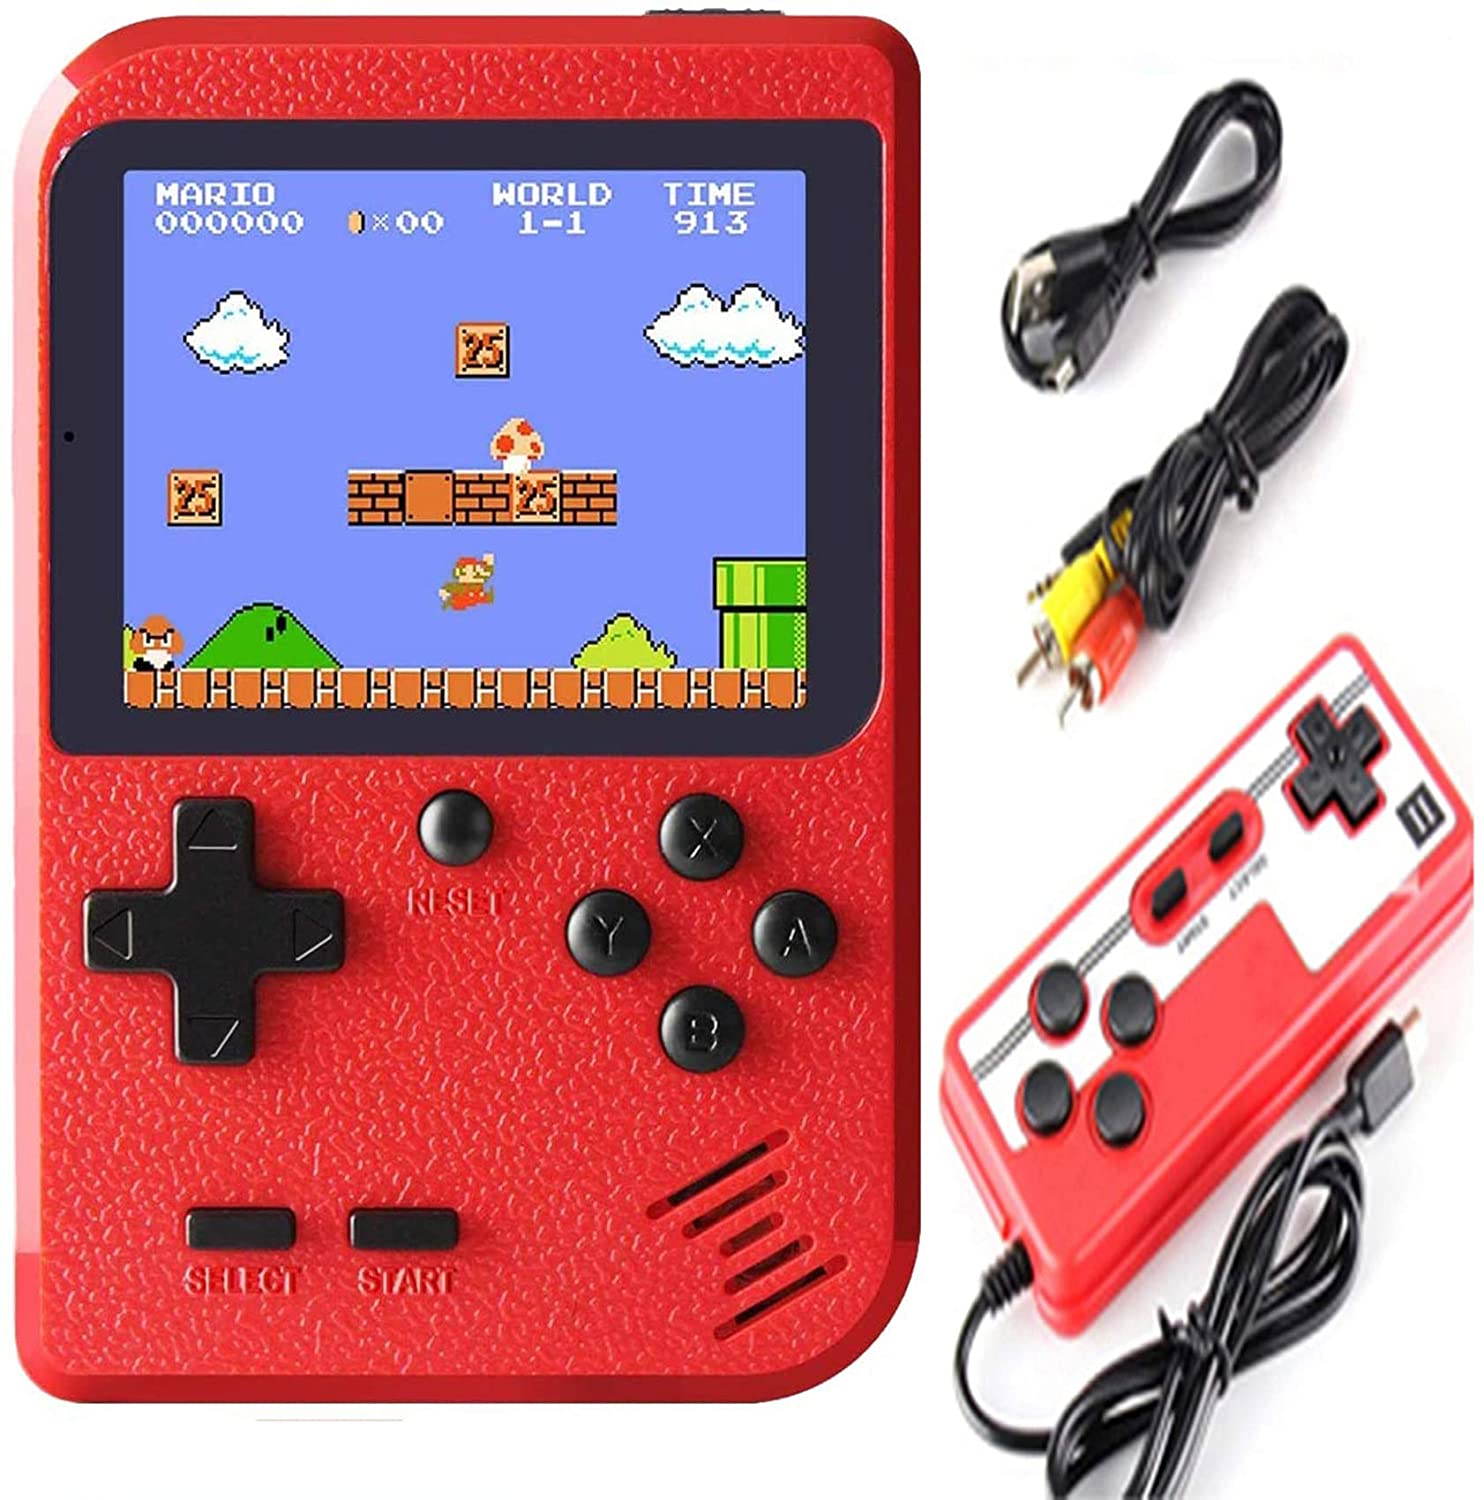 plug and play video game console